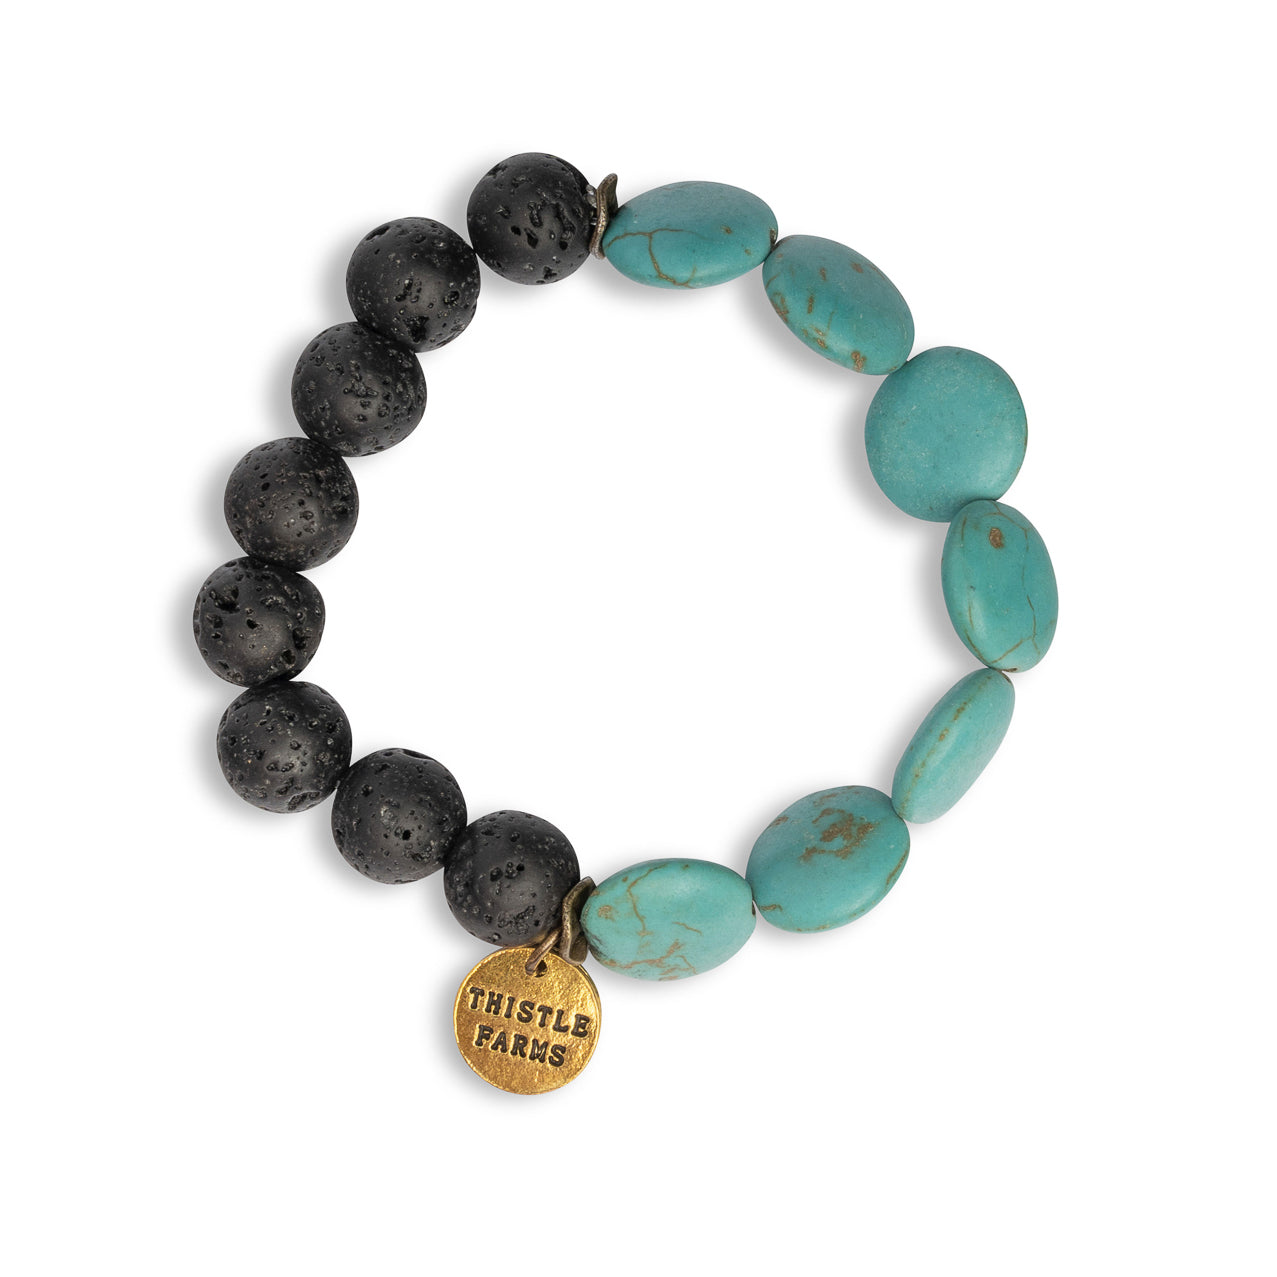 Buy Mautik Sadiwala Stone Exclusive Wealth,Prosperity And Success Gemstone  Bracelet With Tiger Eye,Bronze Lava And Lava Stone Online at Best Prices in  India - JioMart.